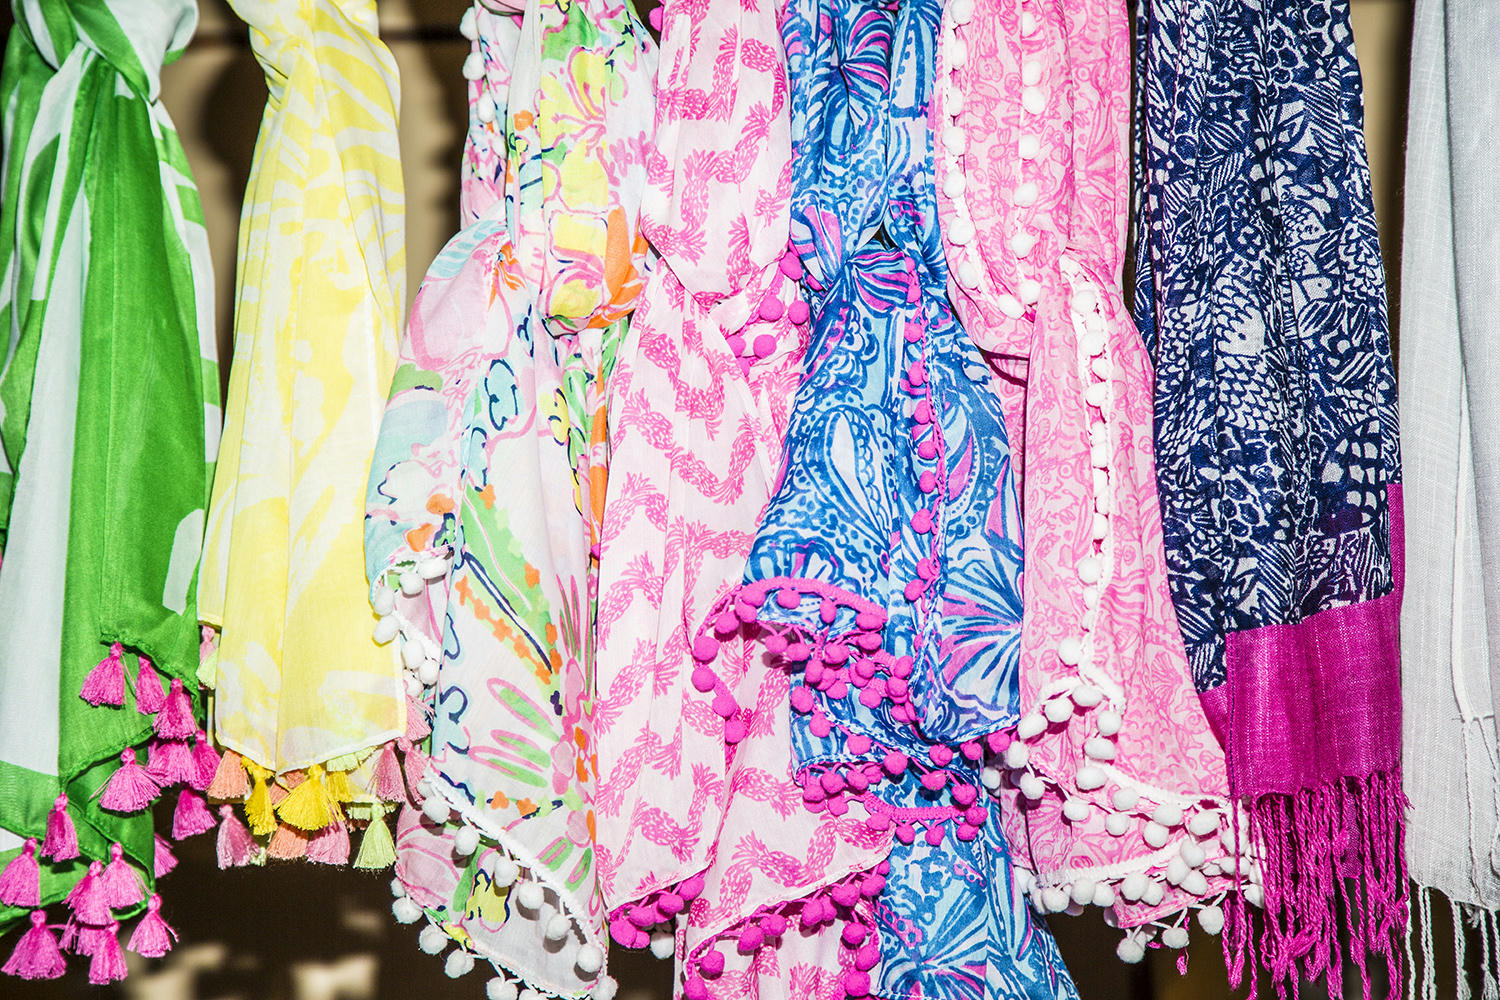 Target is partnering with Lilly Pulitzer on Spring Collection